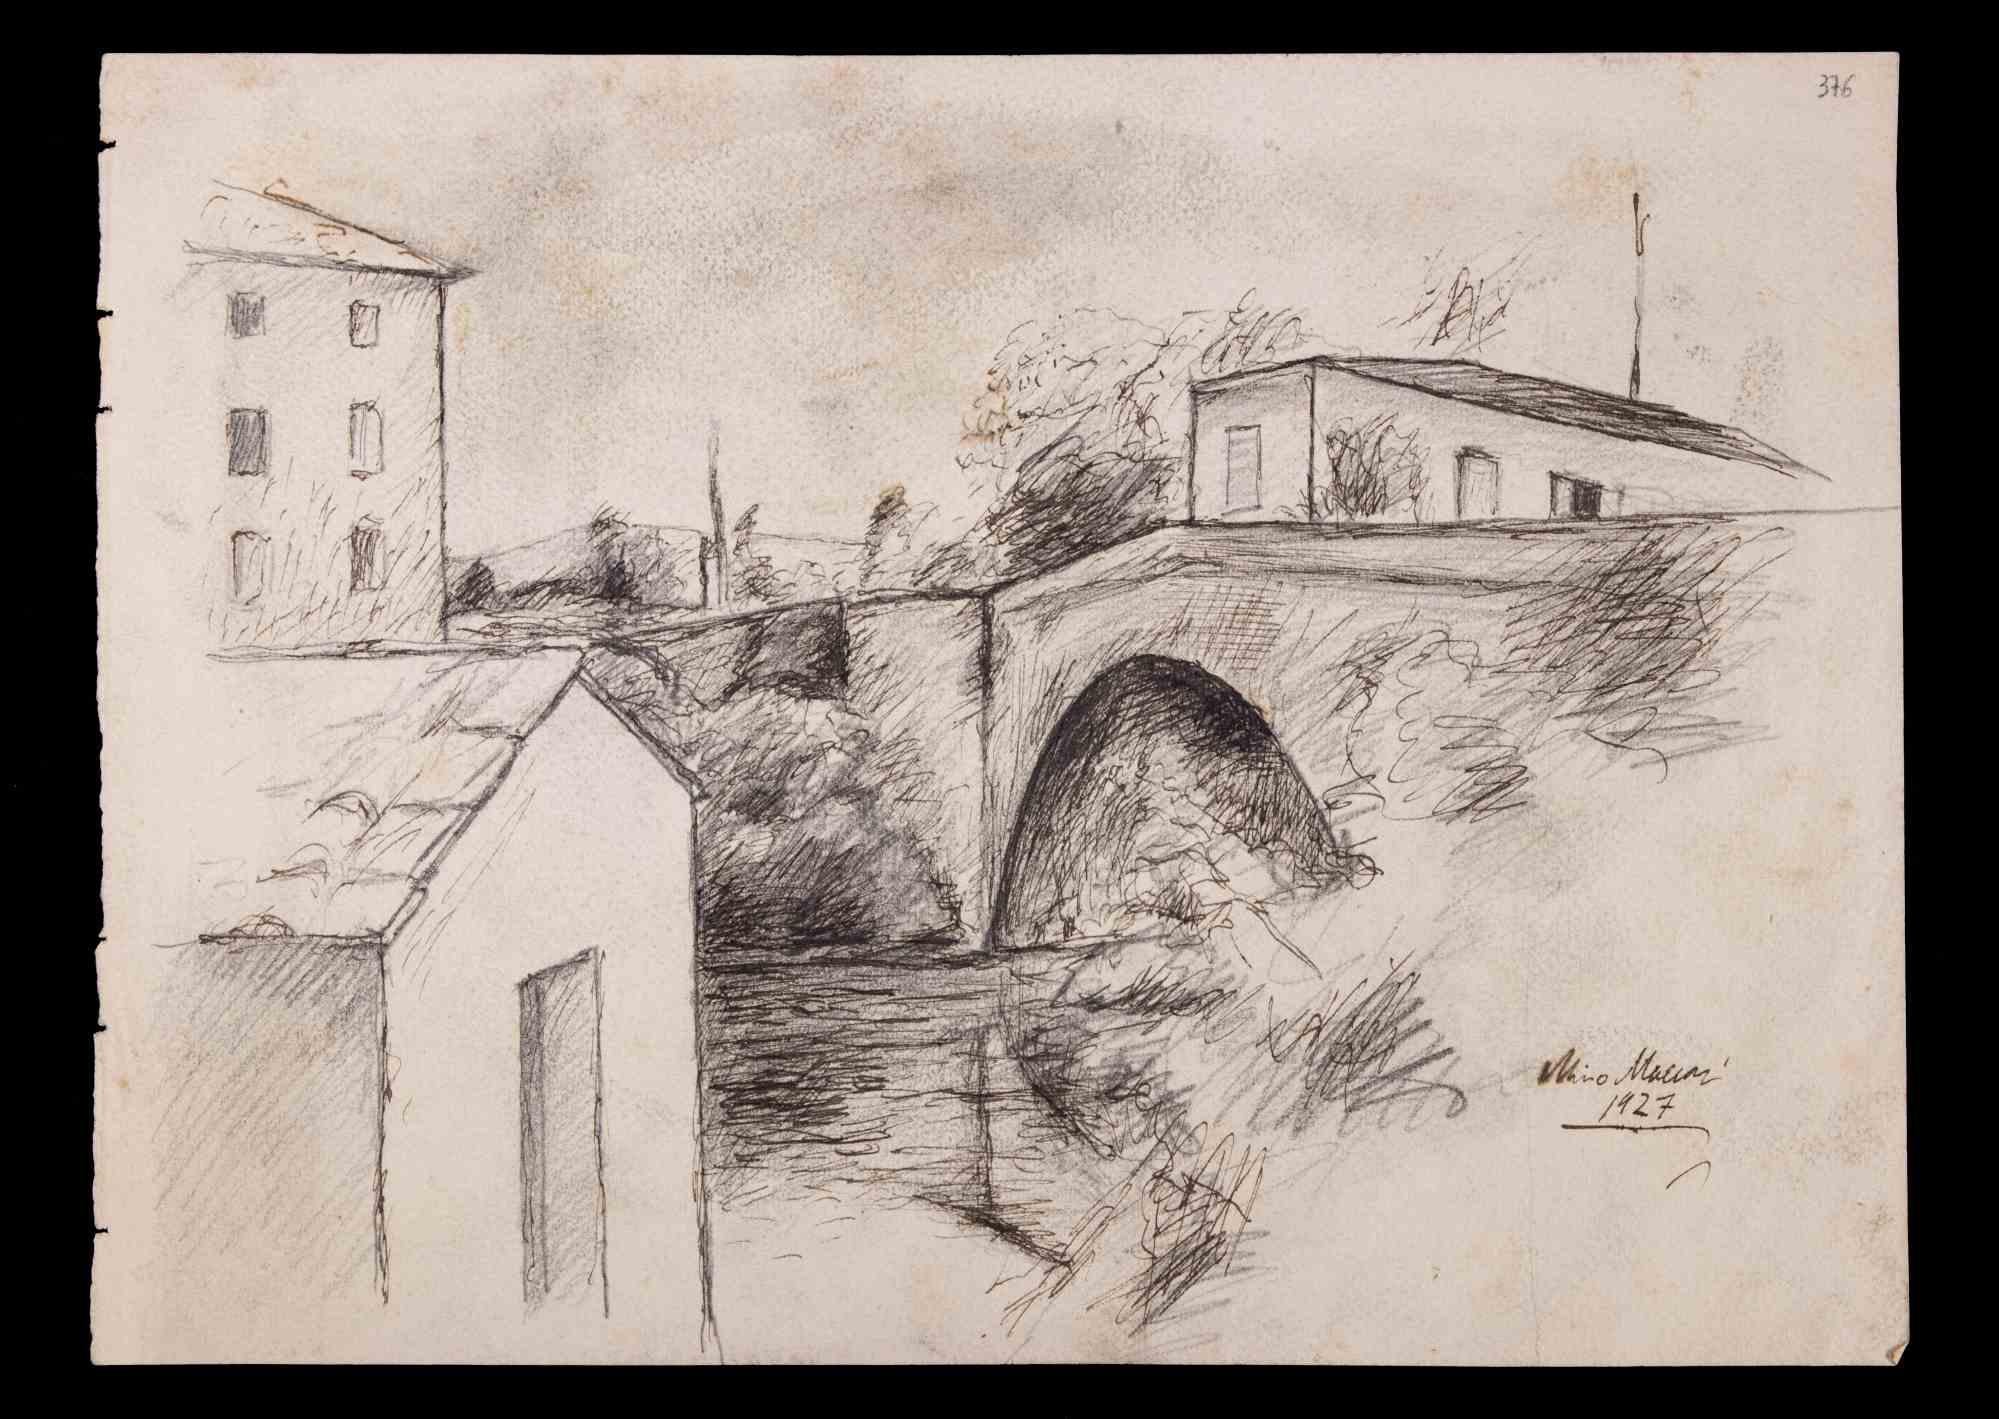 Cityscape is a pencilDrawing realized by Mino Maccari (1924-1989) in 1927.

Hand signed and dated on the lower margin.

Good condition on a yellowed paper.

Mino Maccari (Siena, 1924-Rome, June 16, 1989) was an Italian writer, painter, engraver and